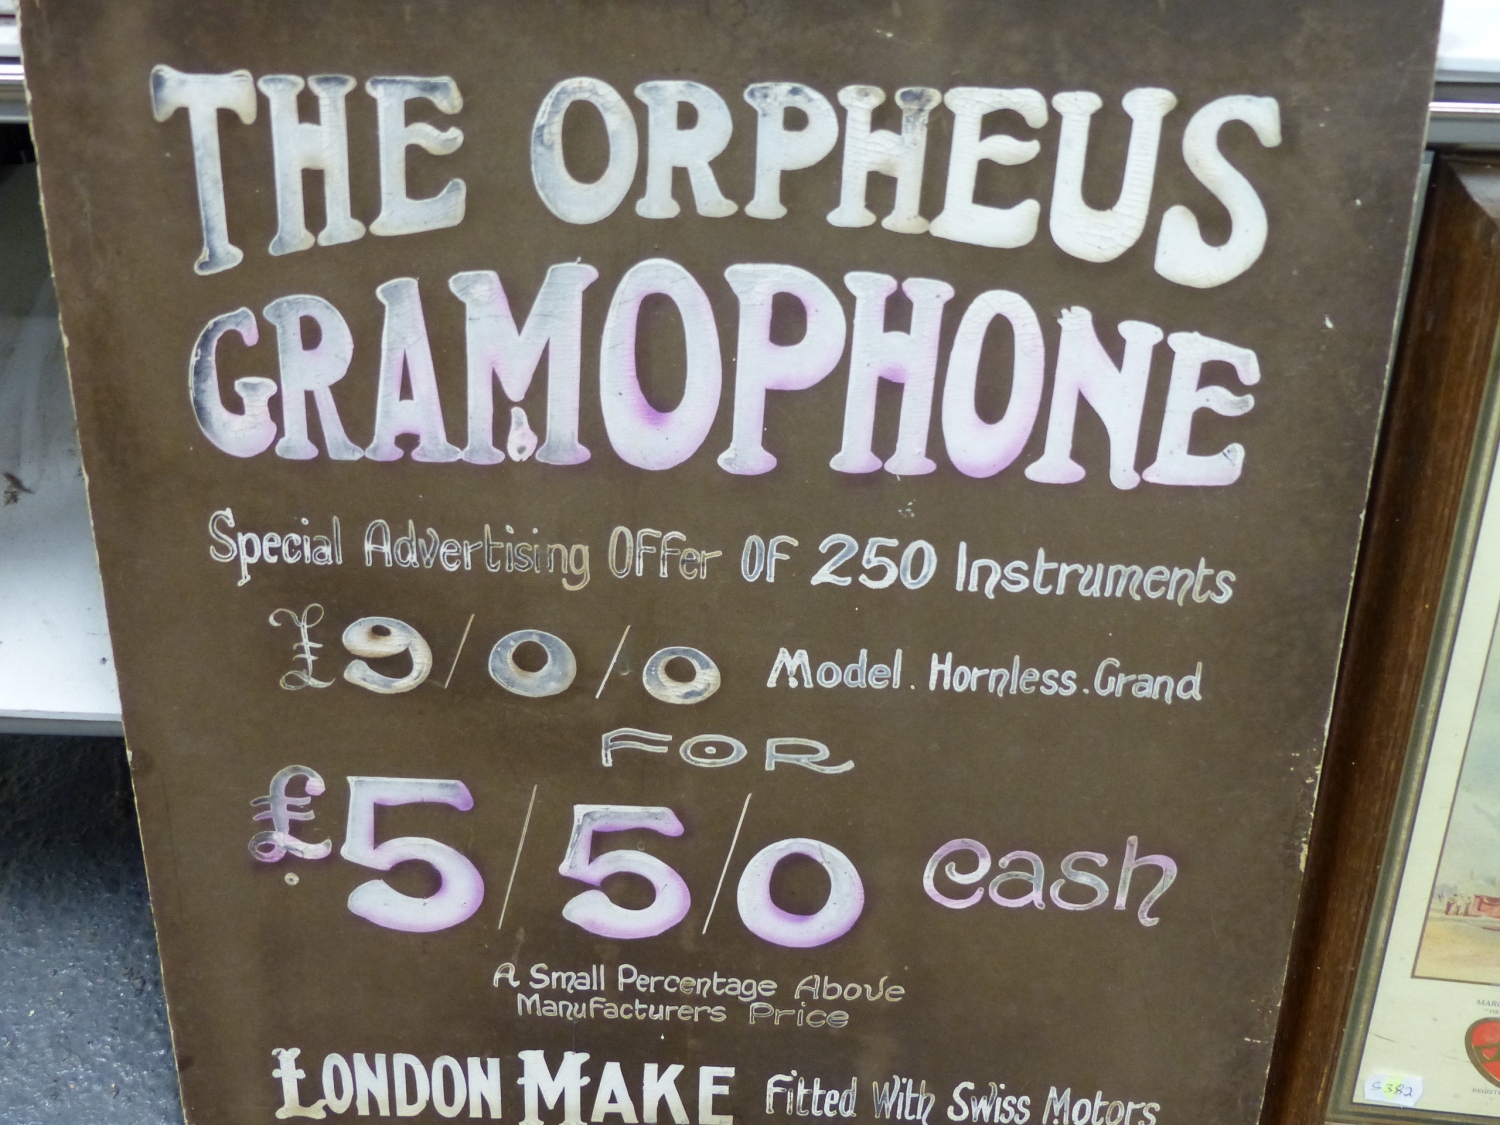 THE ORPHEUS GRAMOPHONE, A PAINTED CARD ADVERTISEMENT FOR 250 INSTRUMENTS AT A DISCOUNTED PRICE OF £ - Image 4 of 9